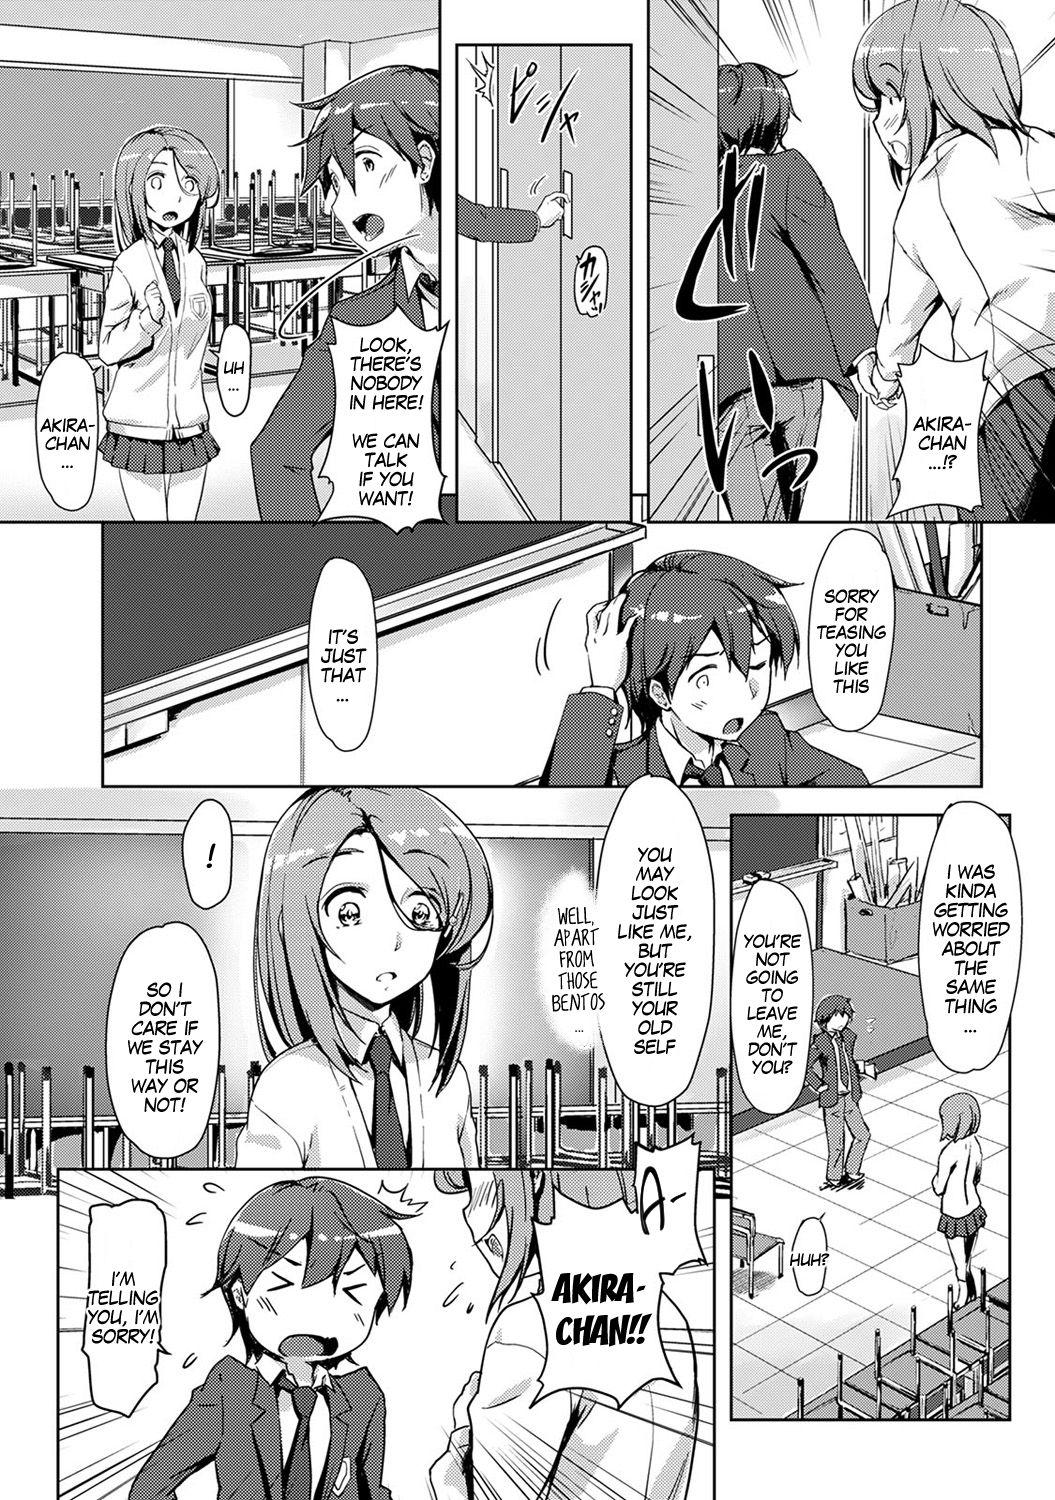 Chacal Ecchi Shitara Irekawacchatta!? | We Switched Our Bodies After Having Sex!? Ch. 3 Free Amateur Porn - Page 10